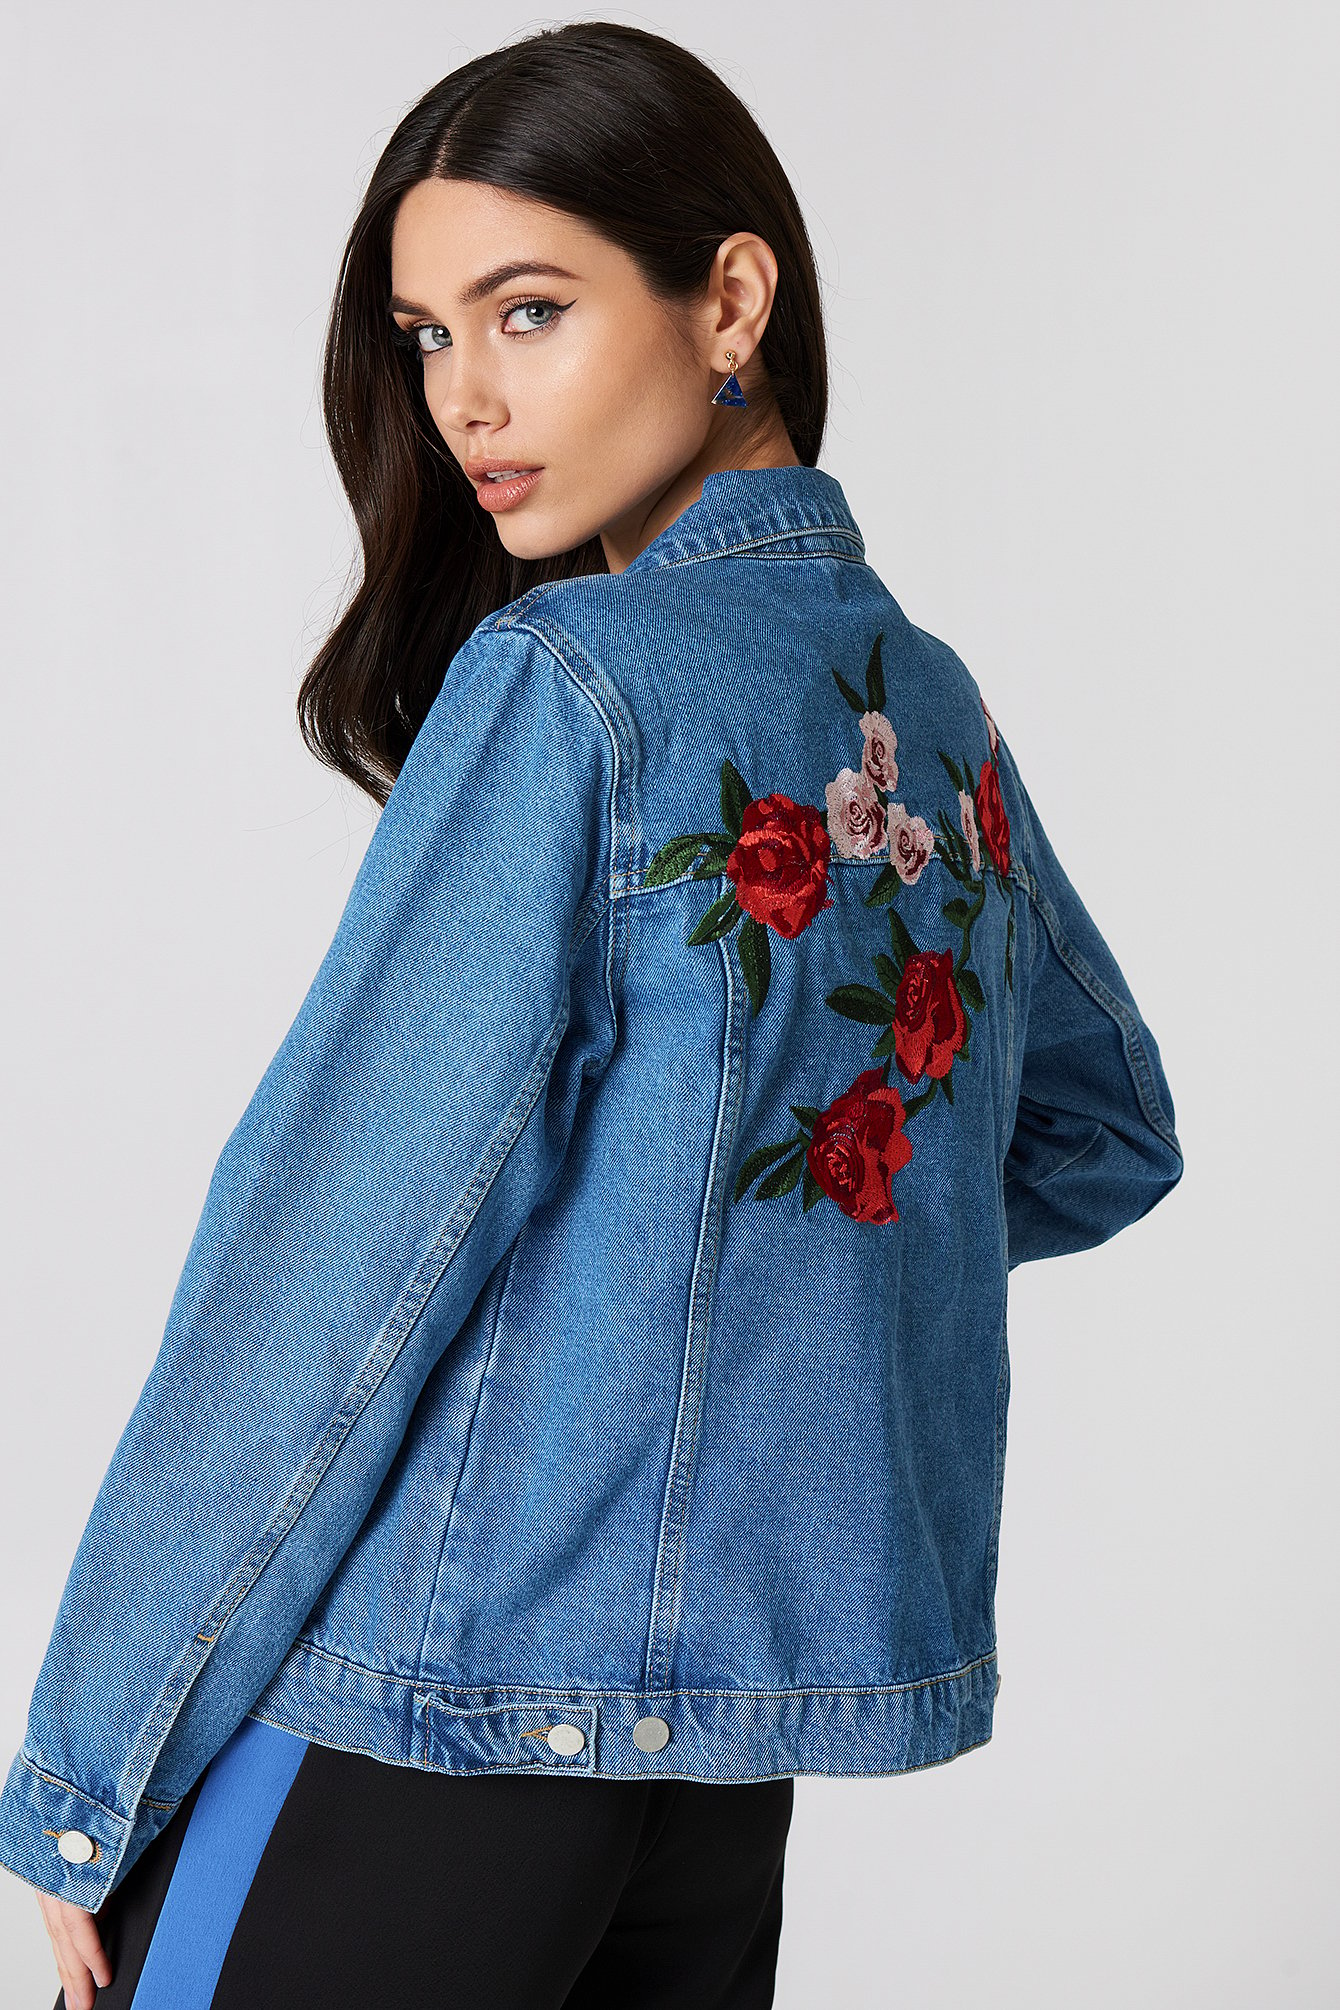 Embroidered Denim Jacket Collection | Custom Embroidery